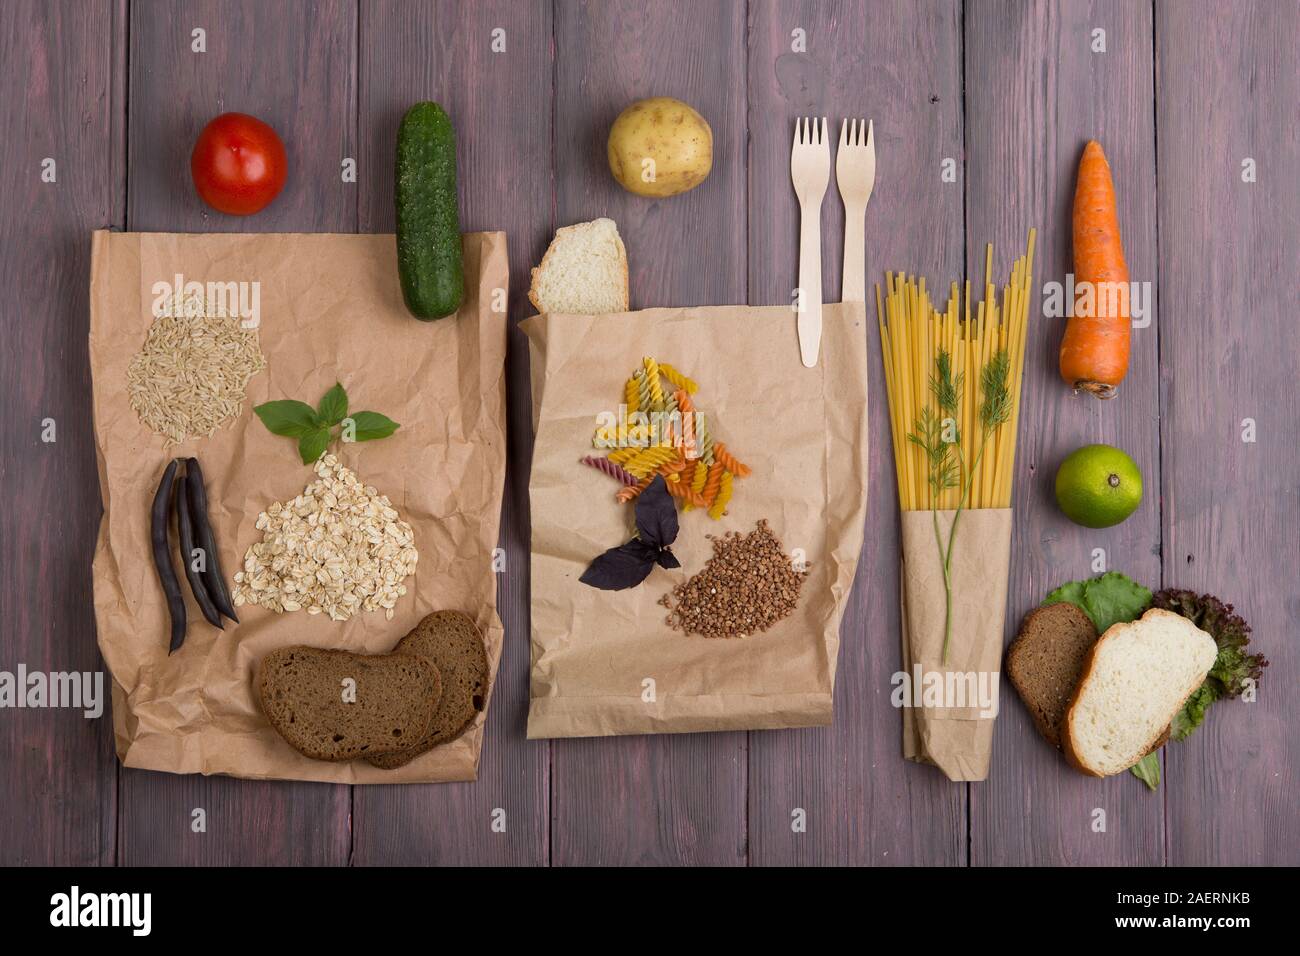 Eco bags with products rich of complex carbohedrates: cereals, bread, pasta and vegetables on wooden table Stock Photo